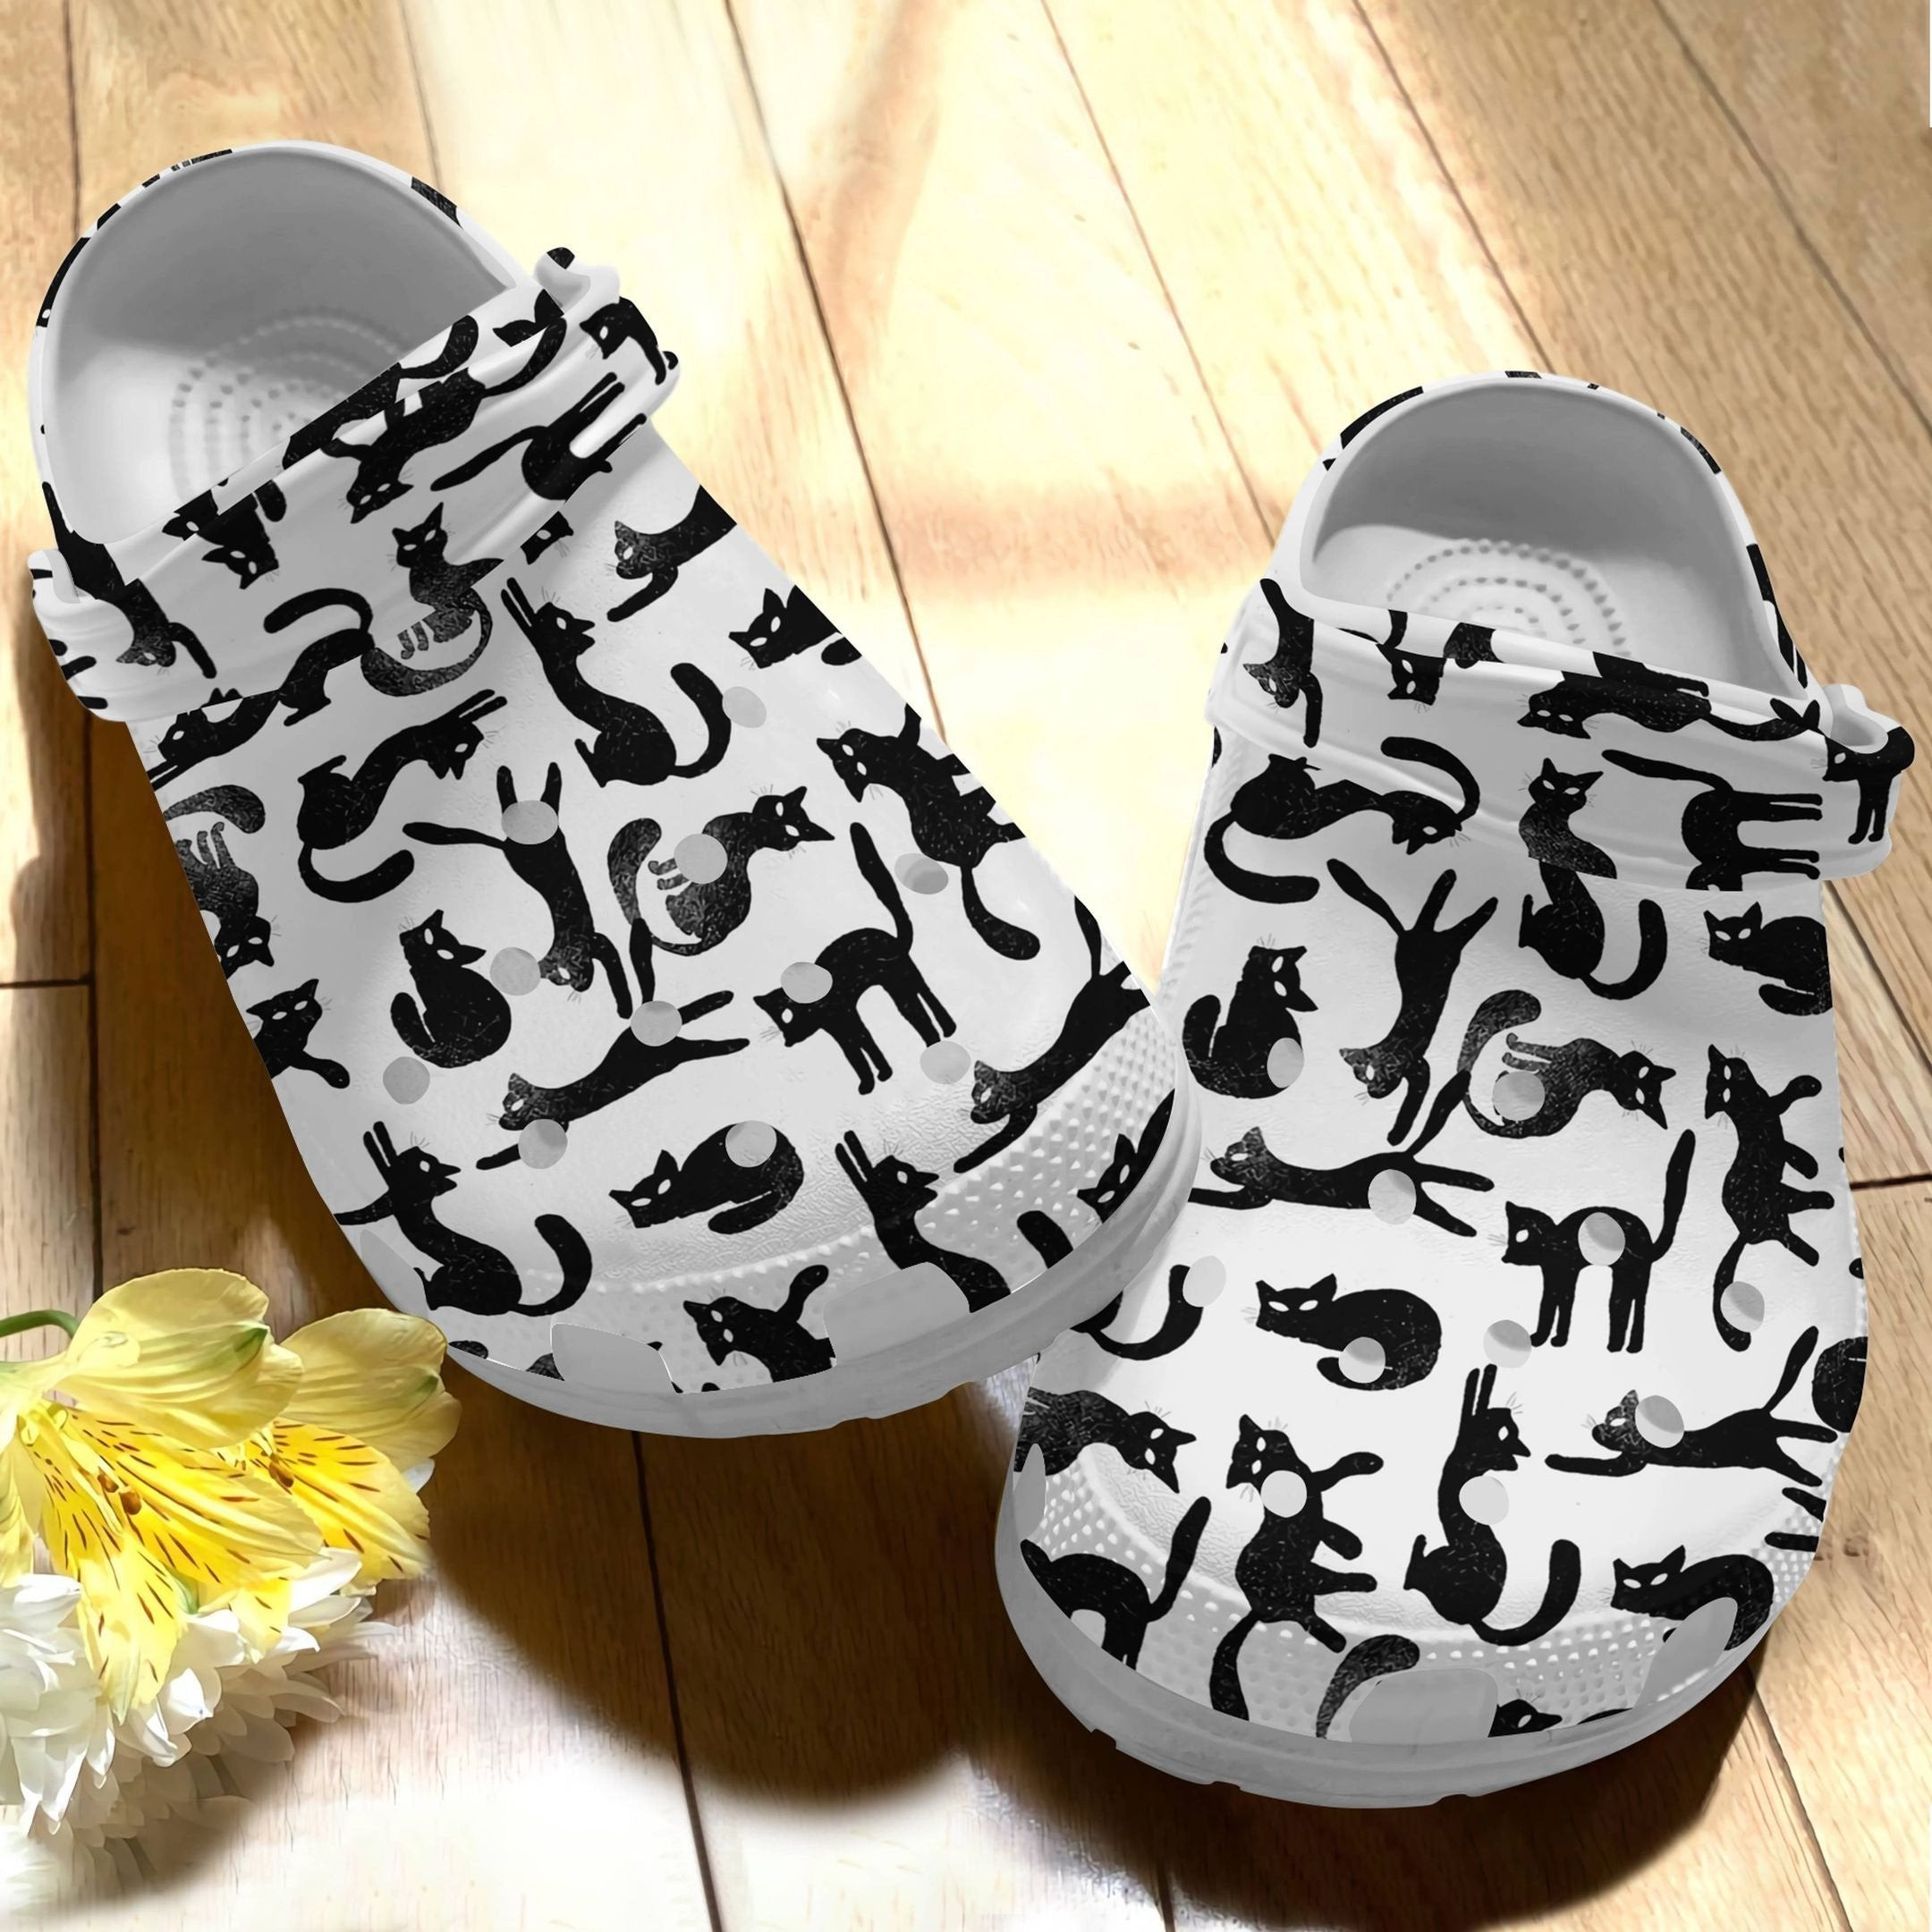 Black Cat Pattern Shoes - Funny Animal Crocs Clog Gift For Birthday